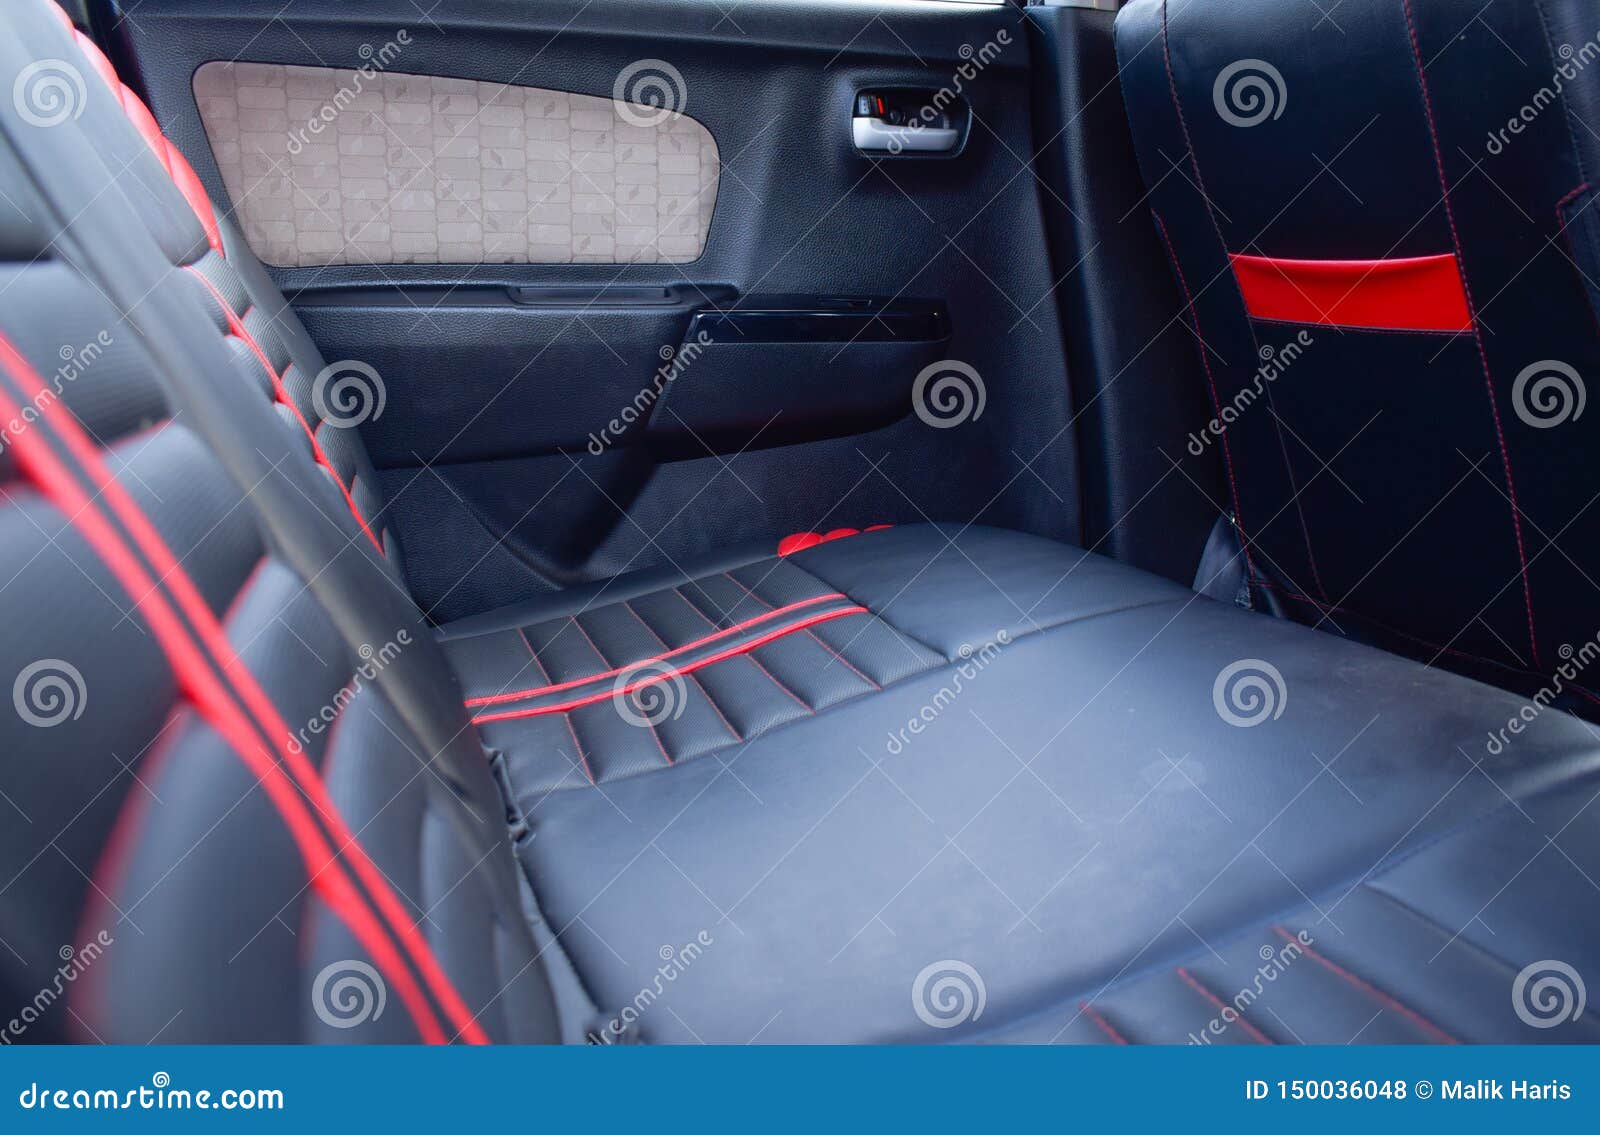 Photo About Interior Design Of A Car Beautiful Family Car